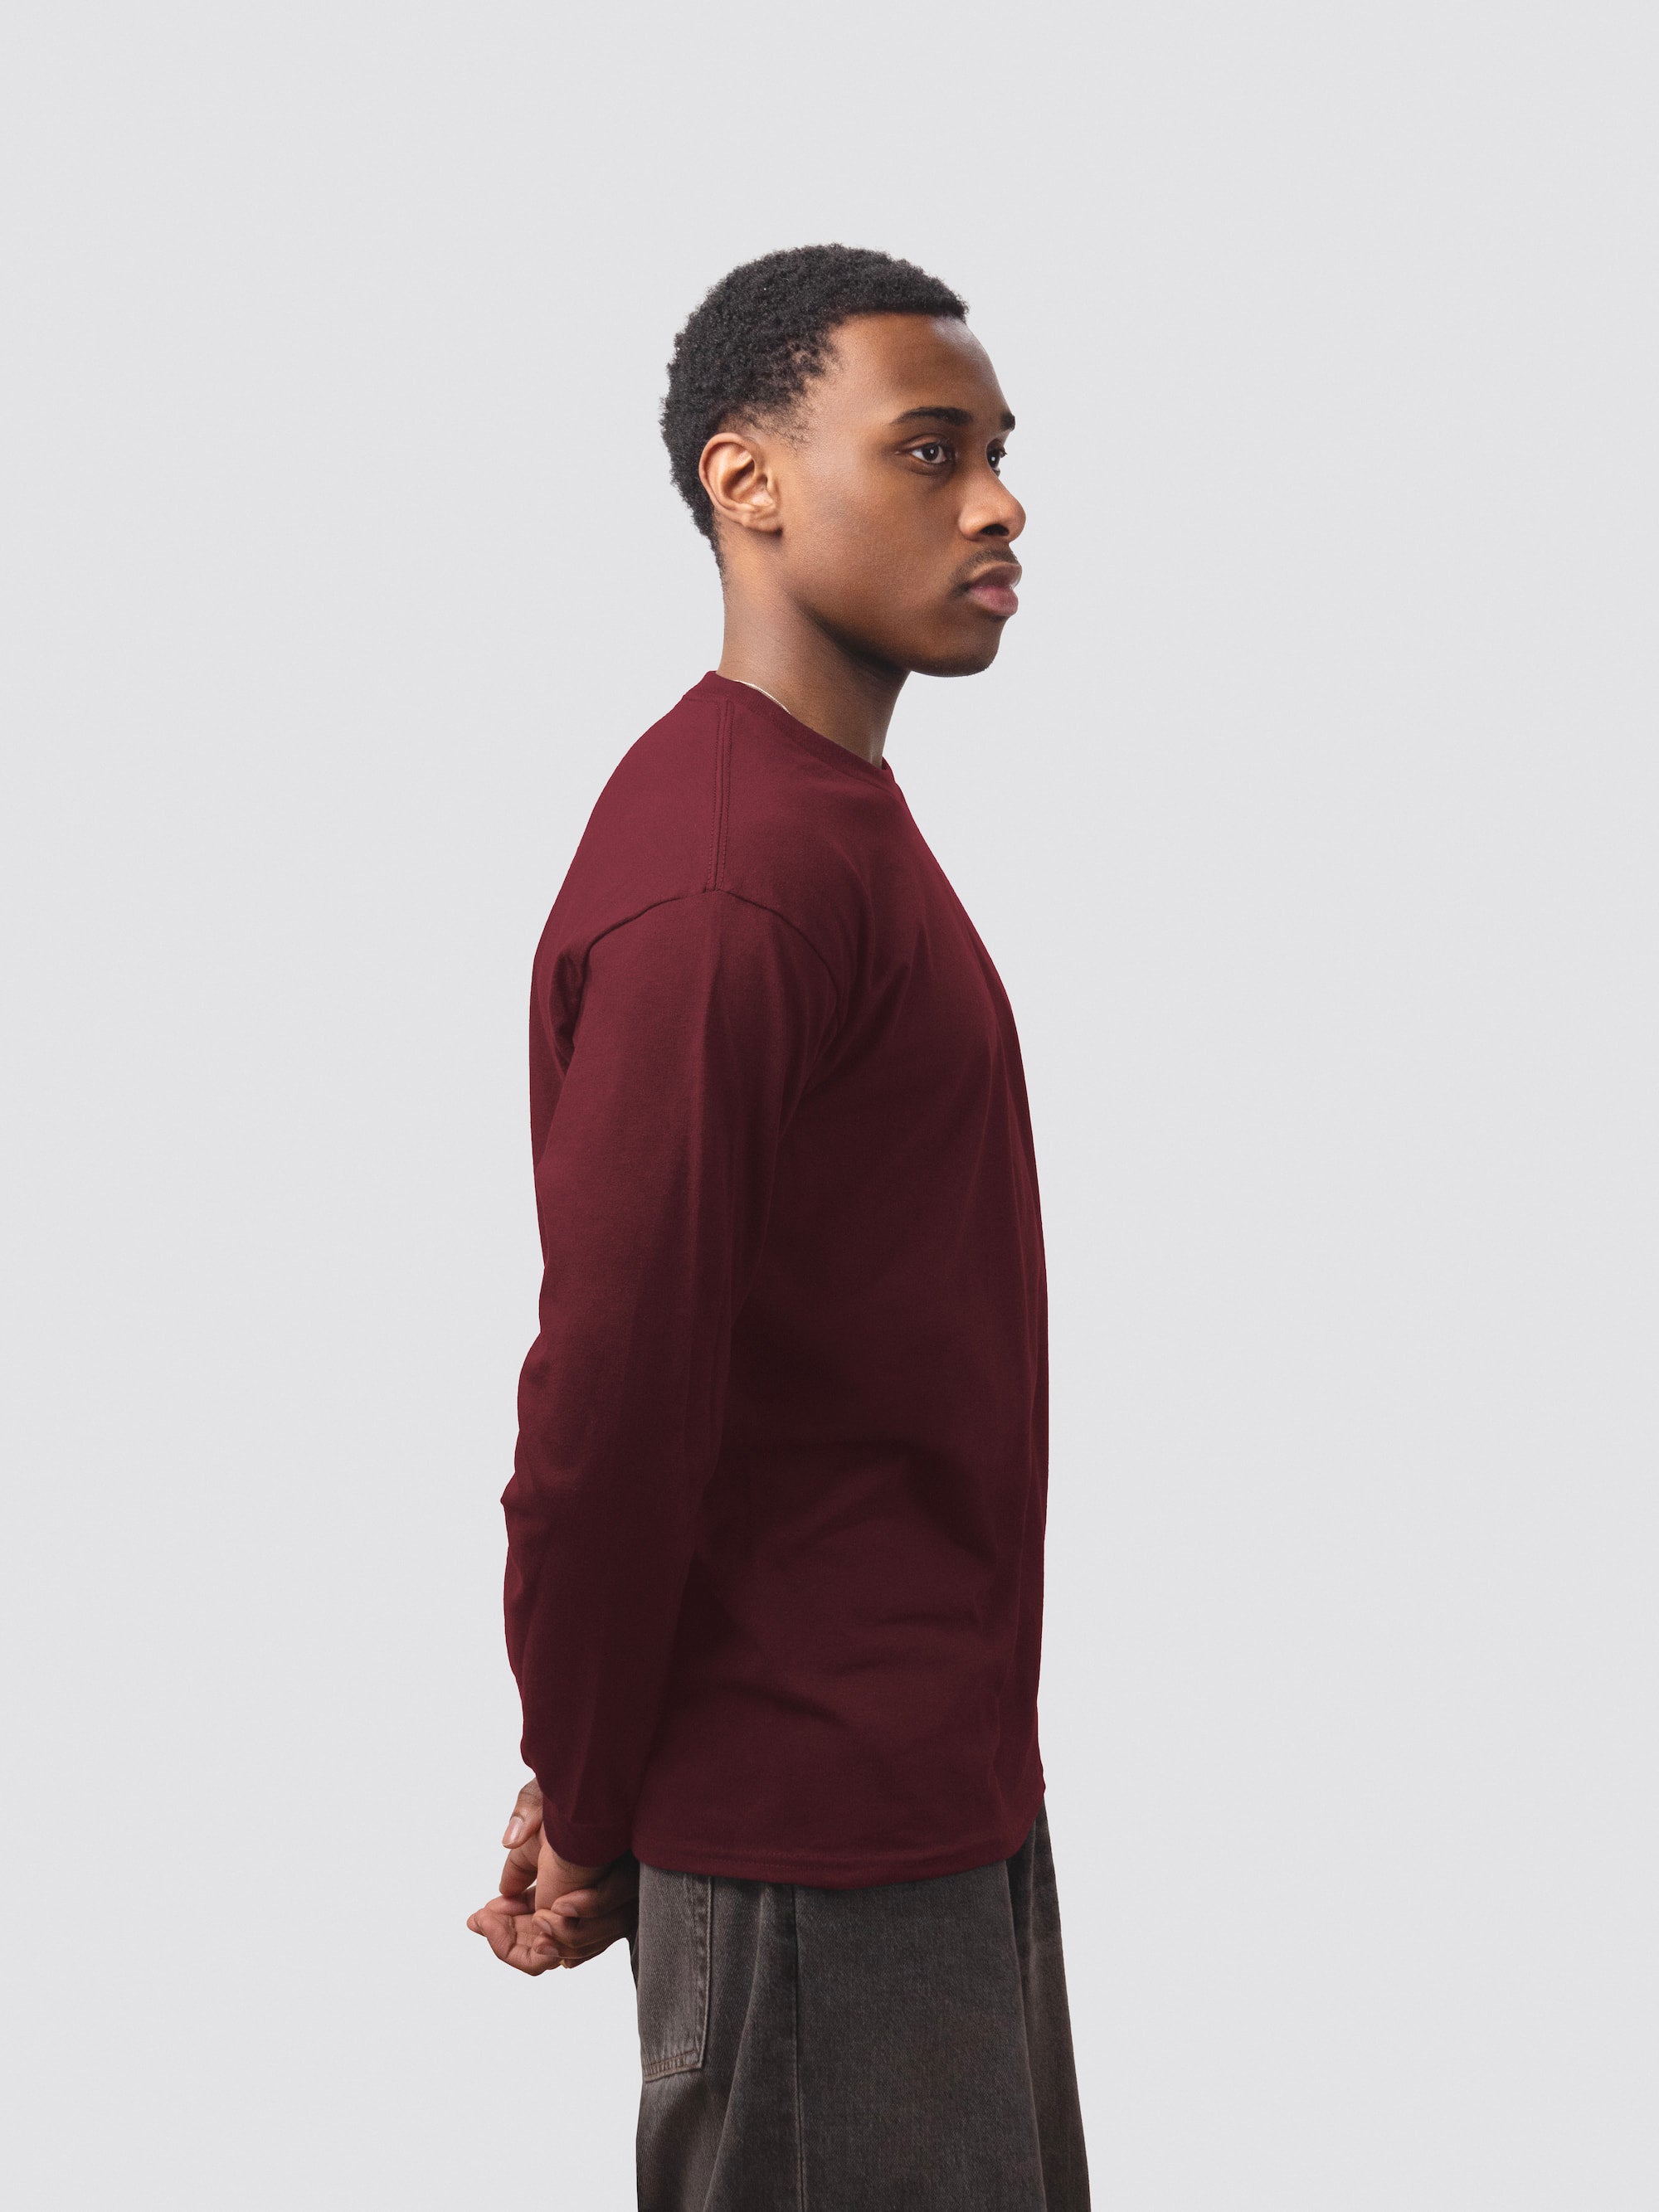 Burgundy long sleeve from Redbird, worn by male student model